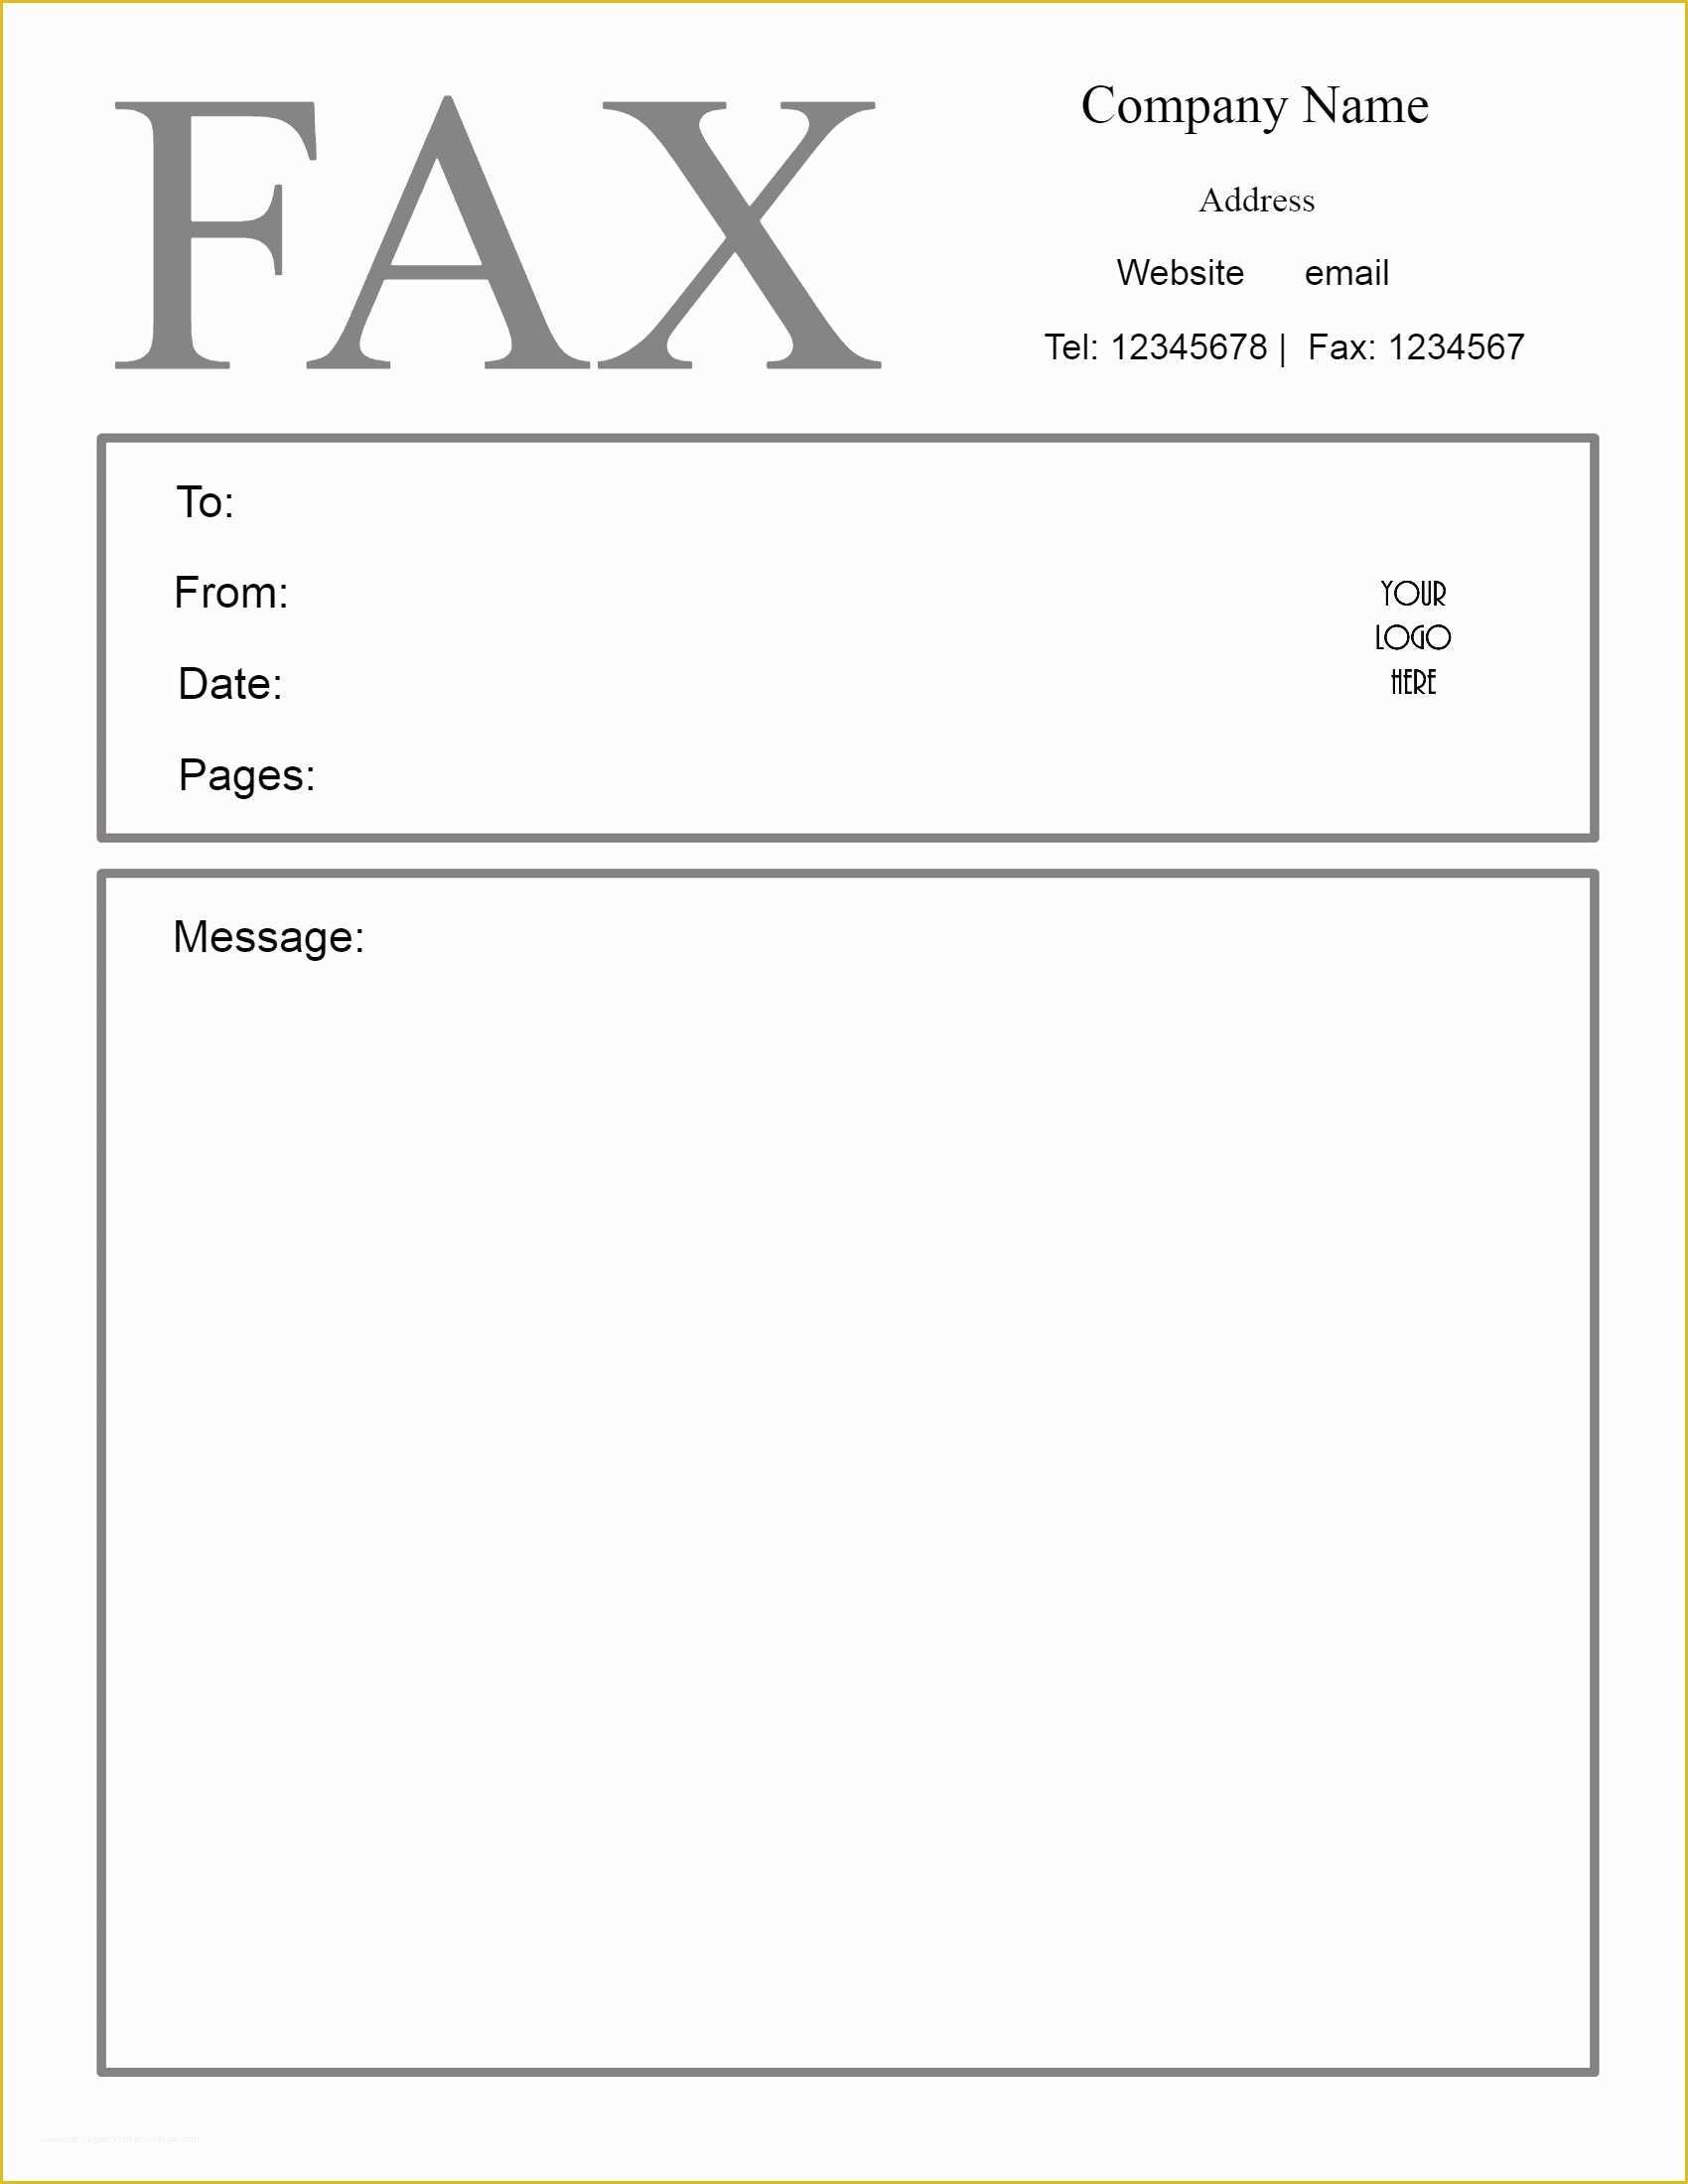 Fax Template Free Of Free Fax Cover Sheet Template